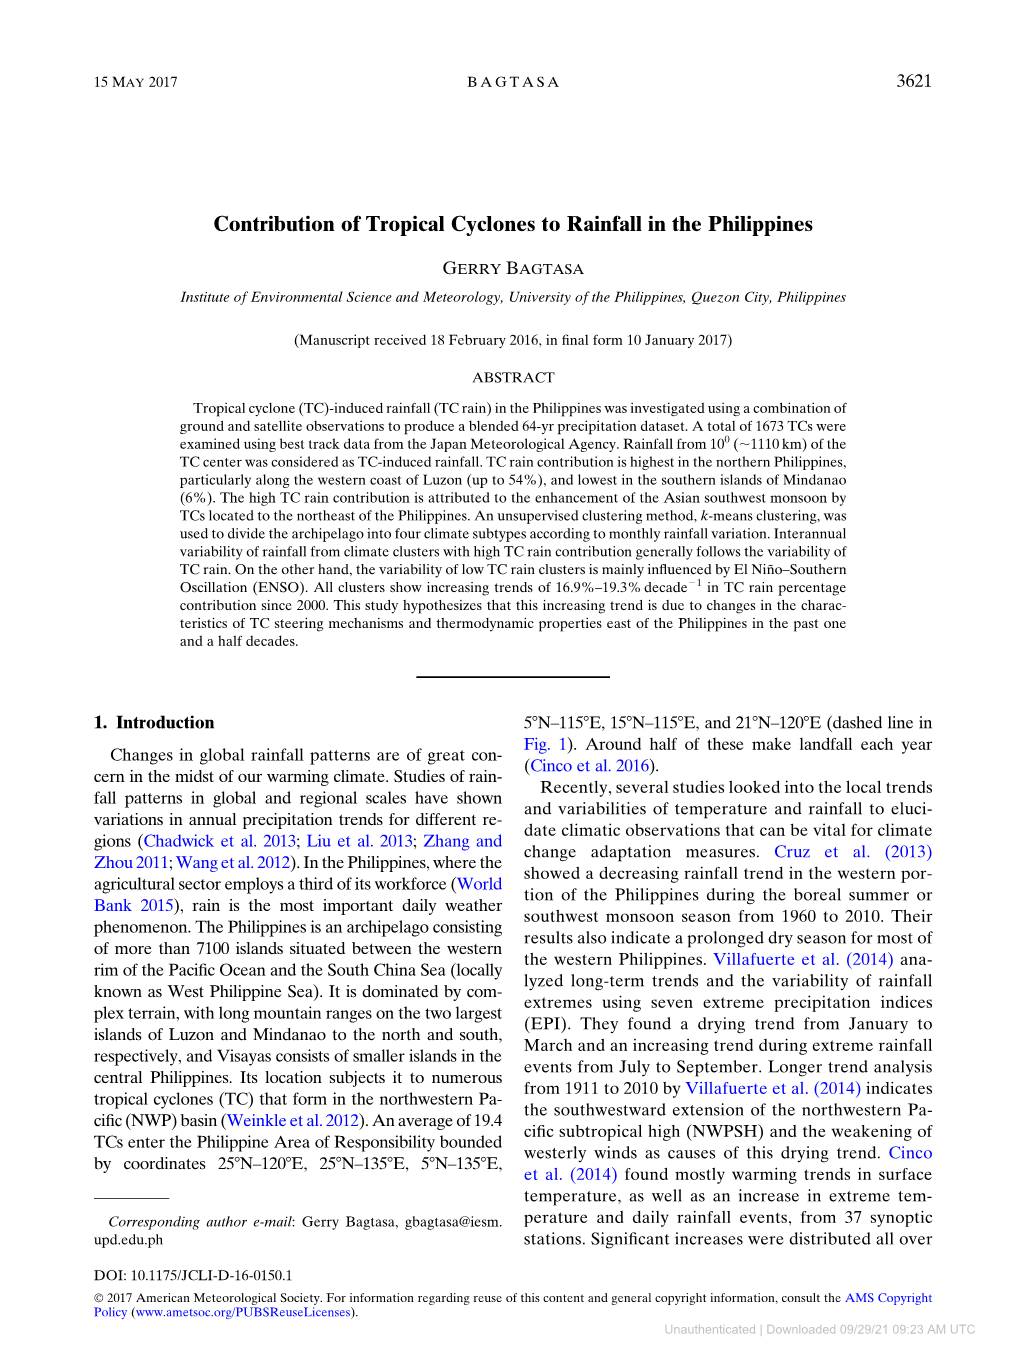 Contribution of Tropical Cyclones to Rainfall in the Philippines